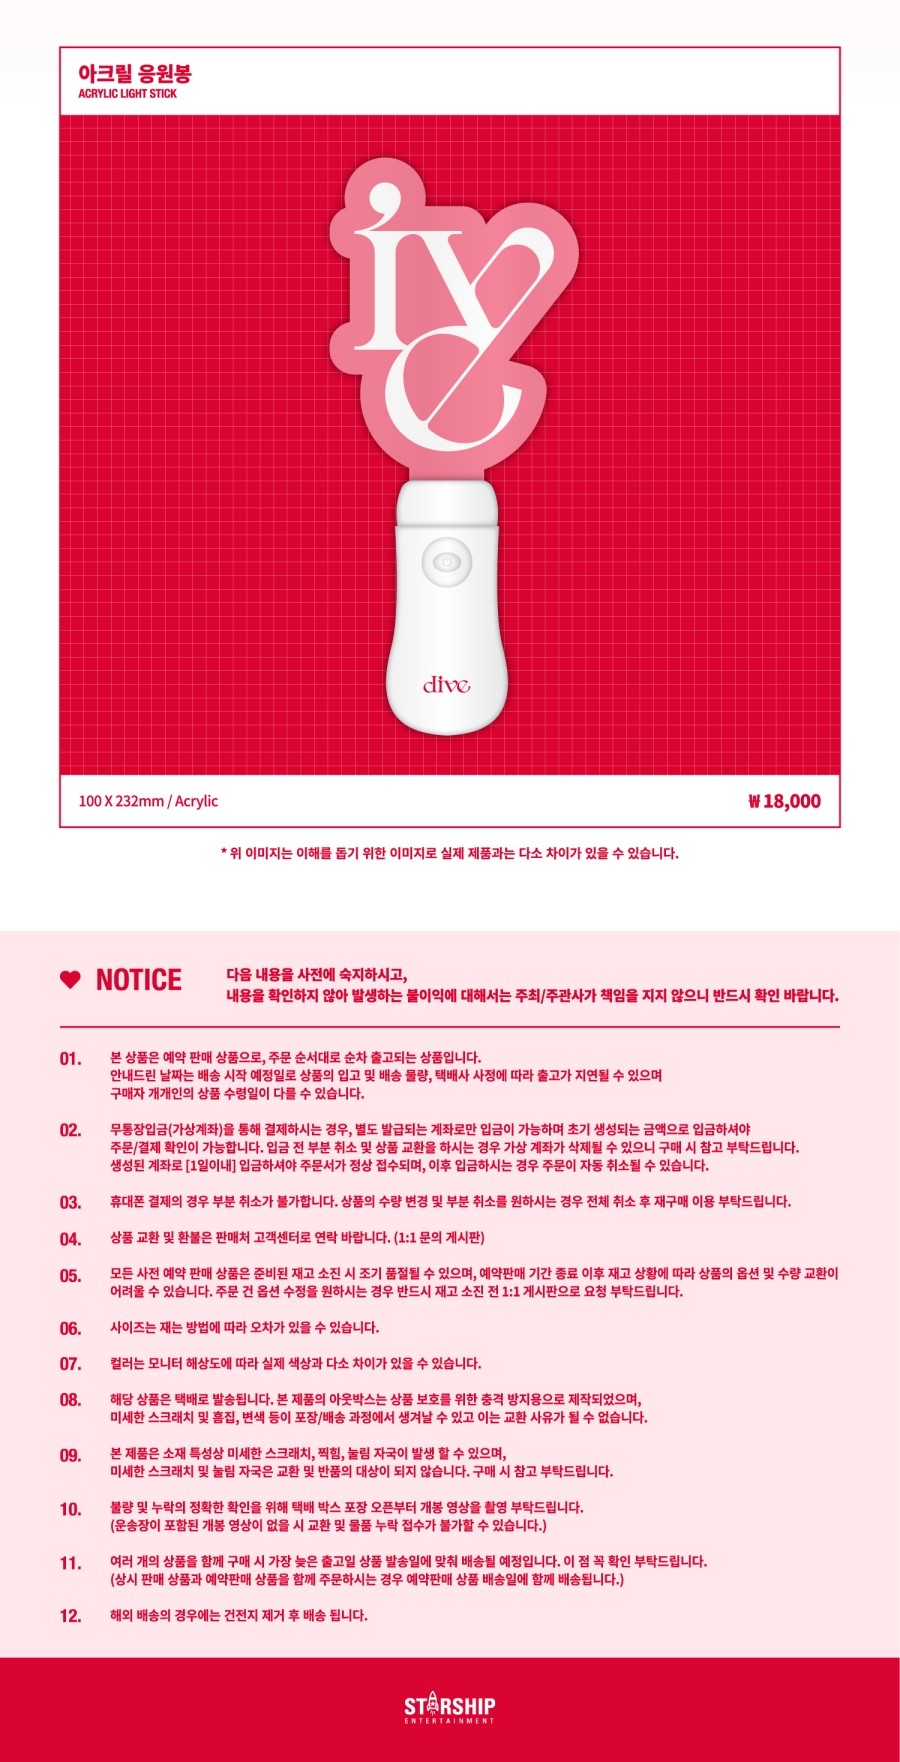 IVE Official light stick MD - official acrylic cheering light stick